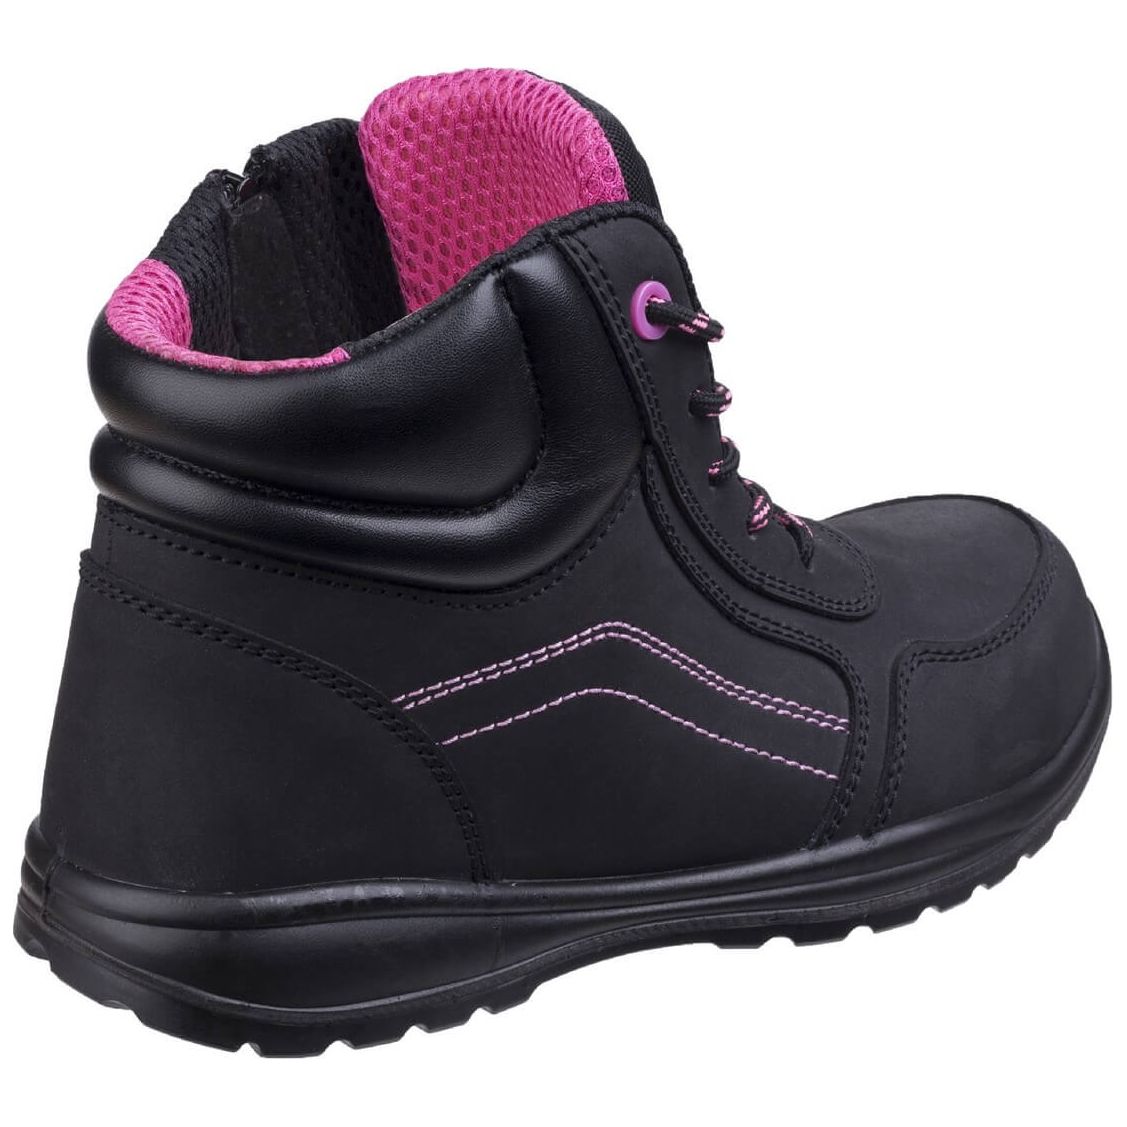 Amblers As601 Lydia Composite Side-Zip Safety Boots Womens - workweargurus.com